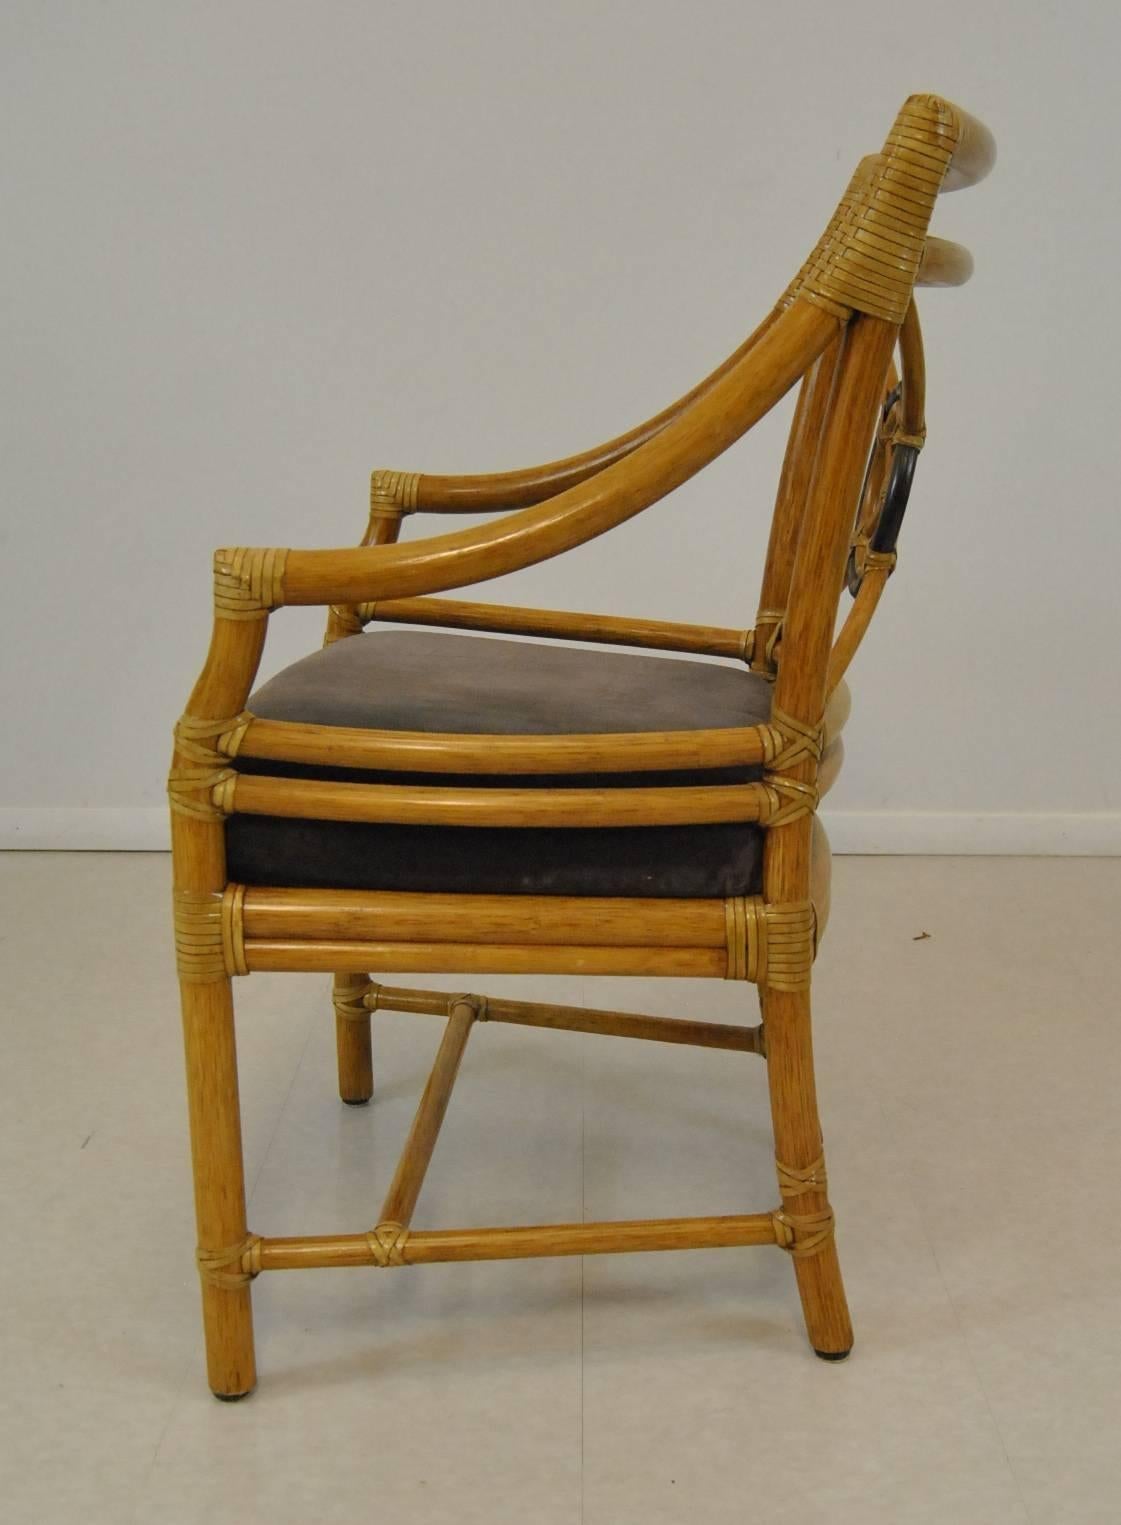 mcguire chairs